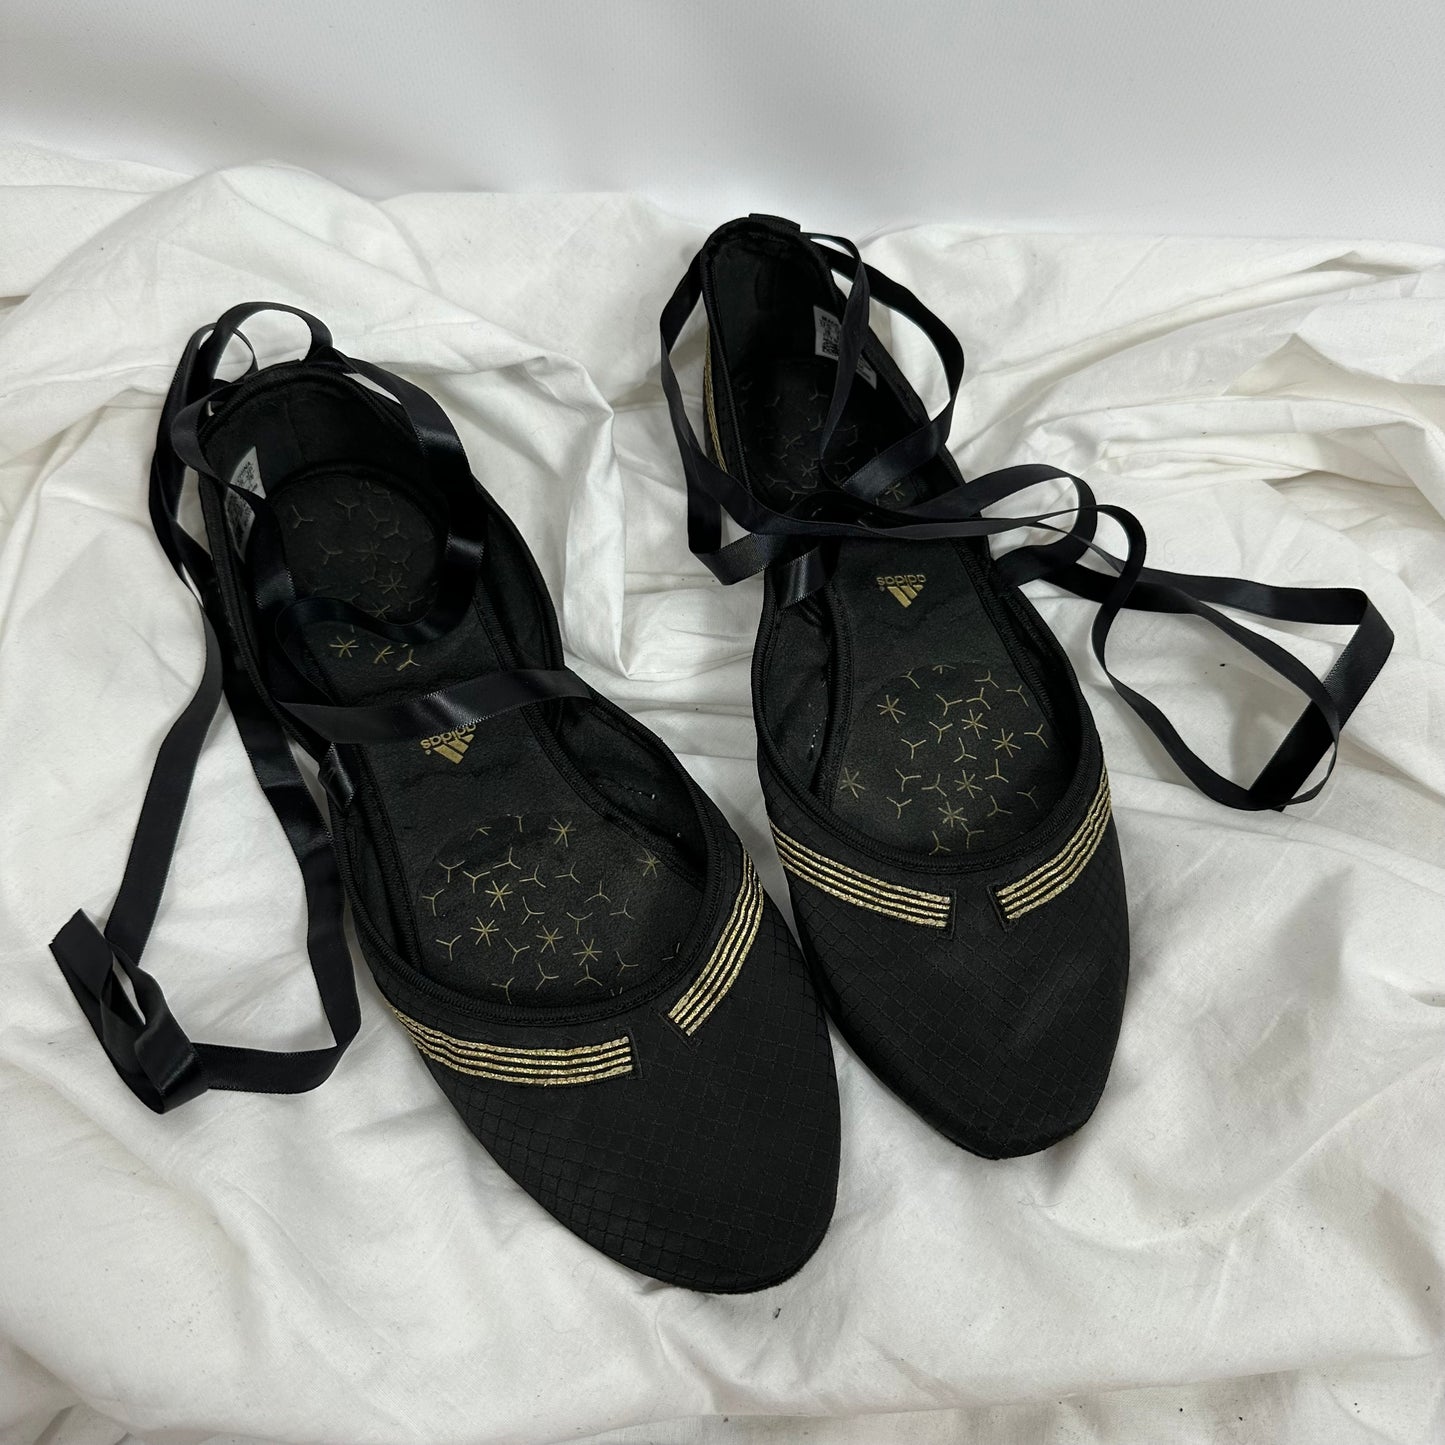 Adidas Lace Up Vintage Ballet Flats 41 US10 W